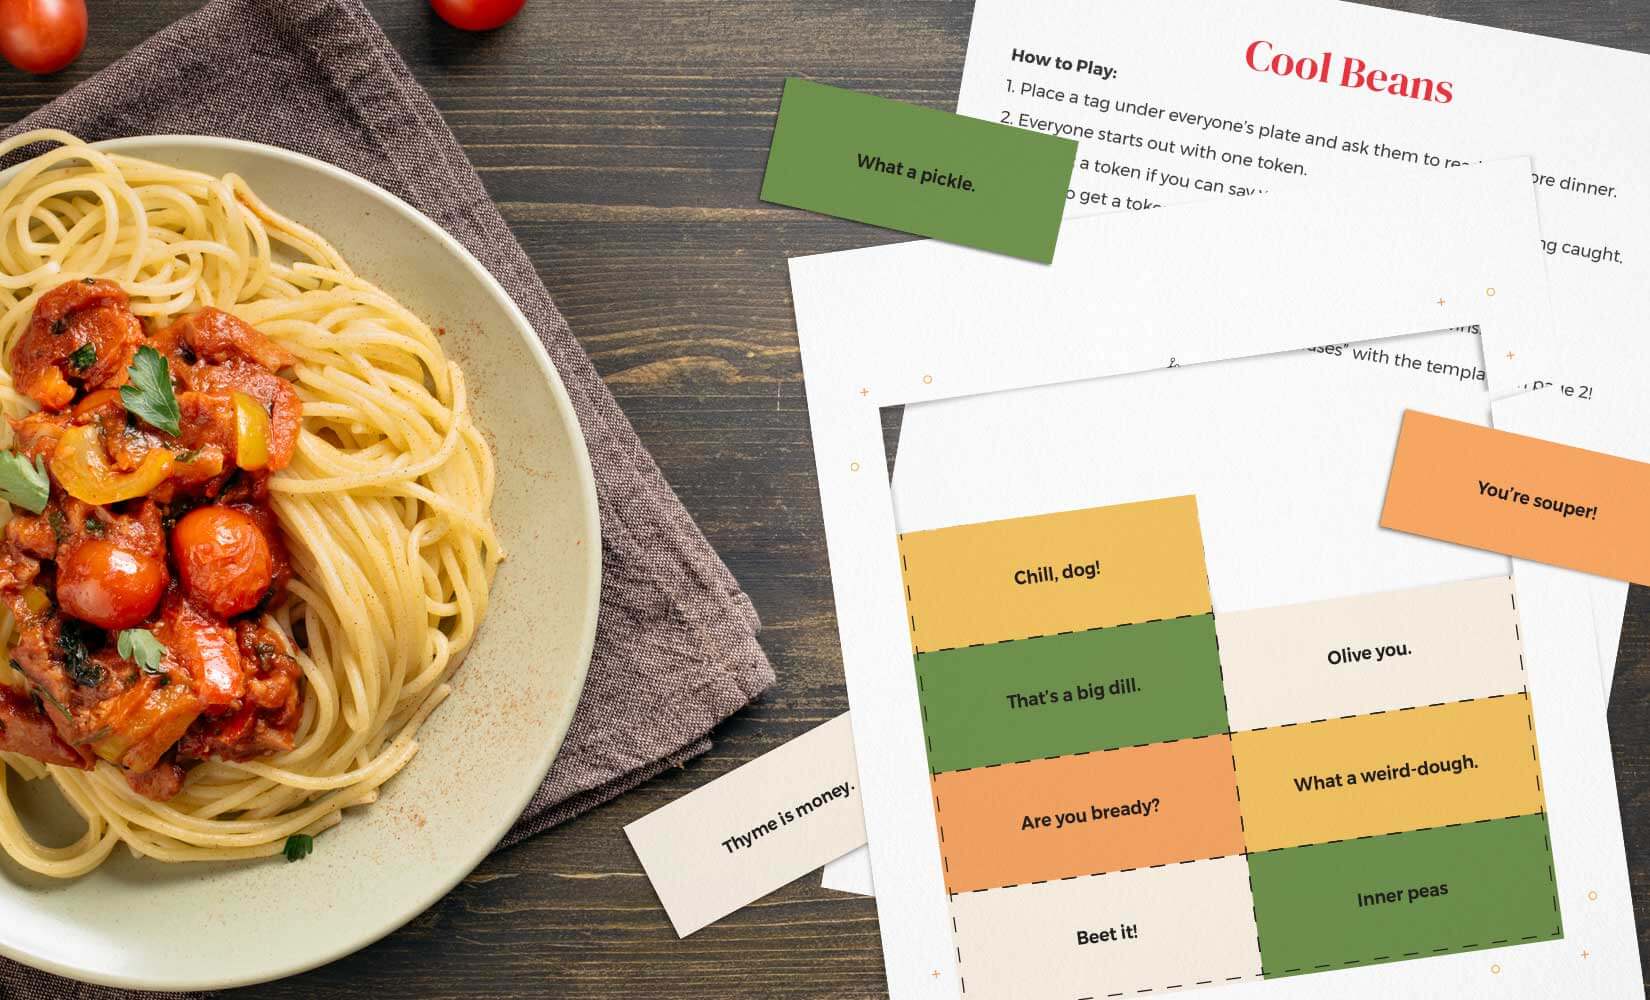 Dinner table with spaghetti dish and cool beans game printable.